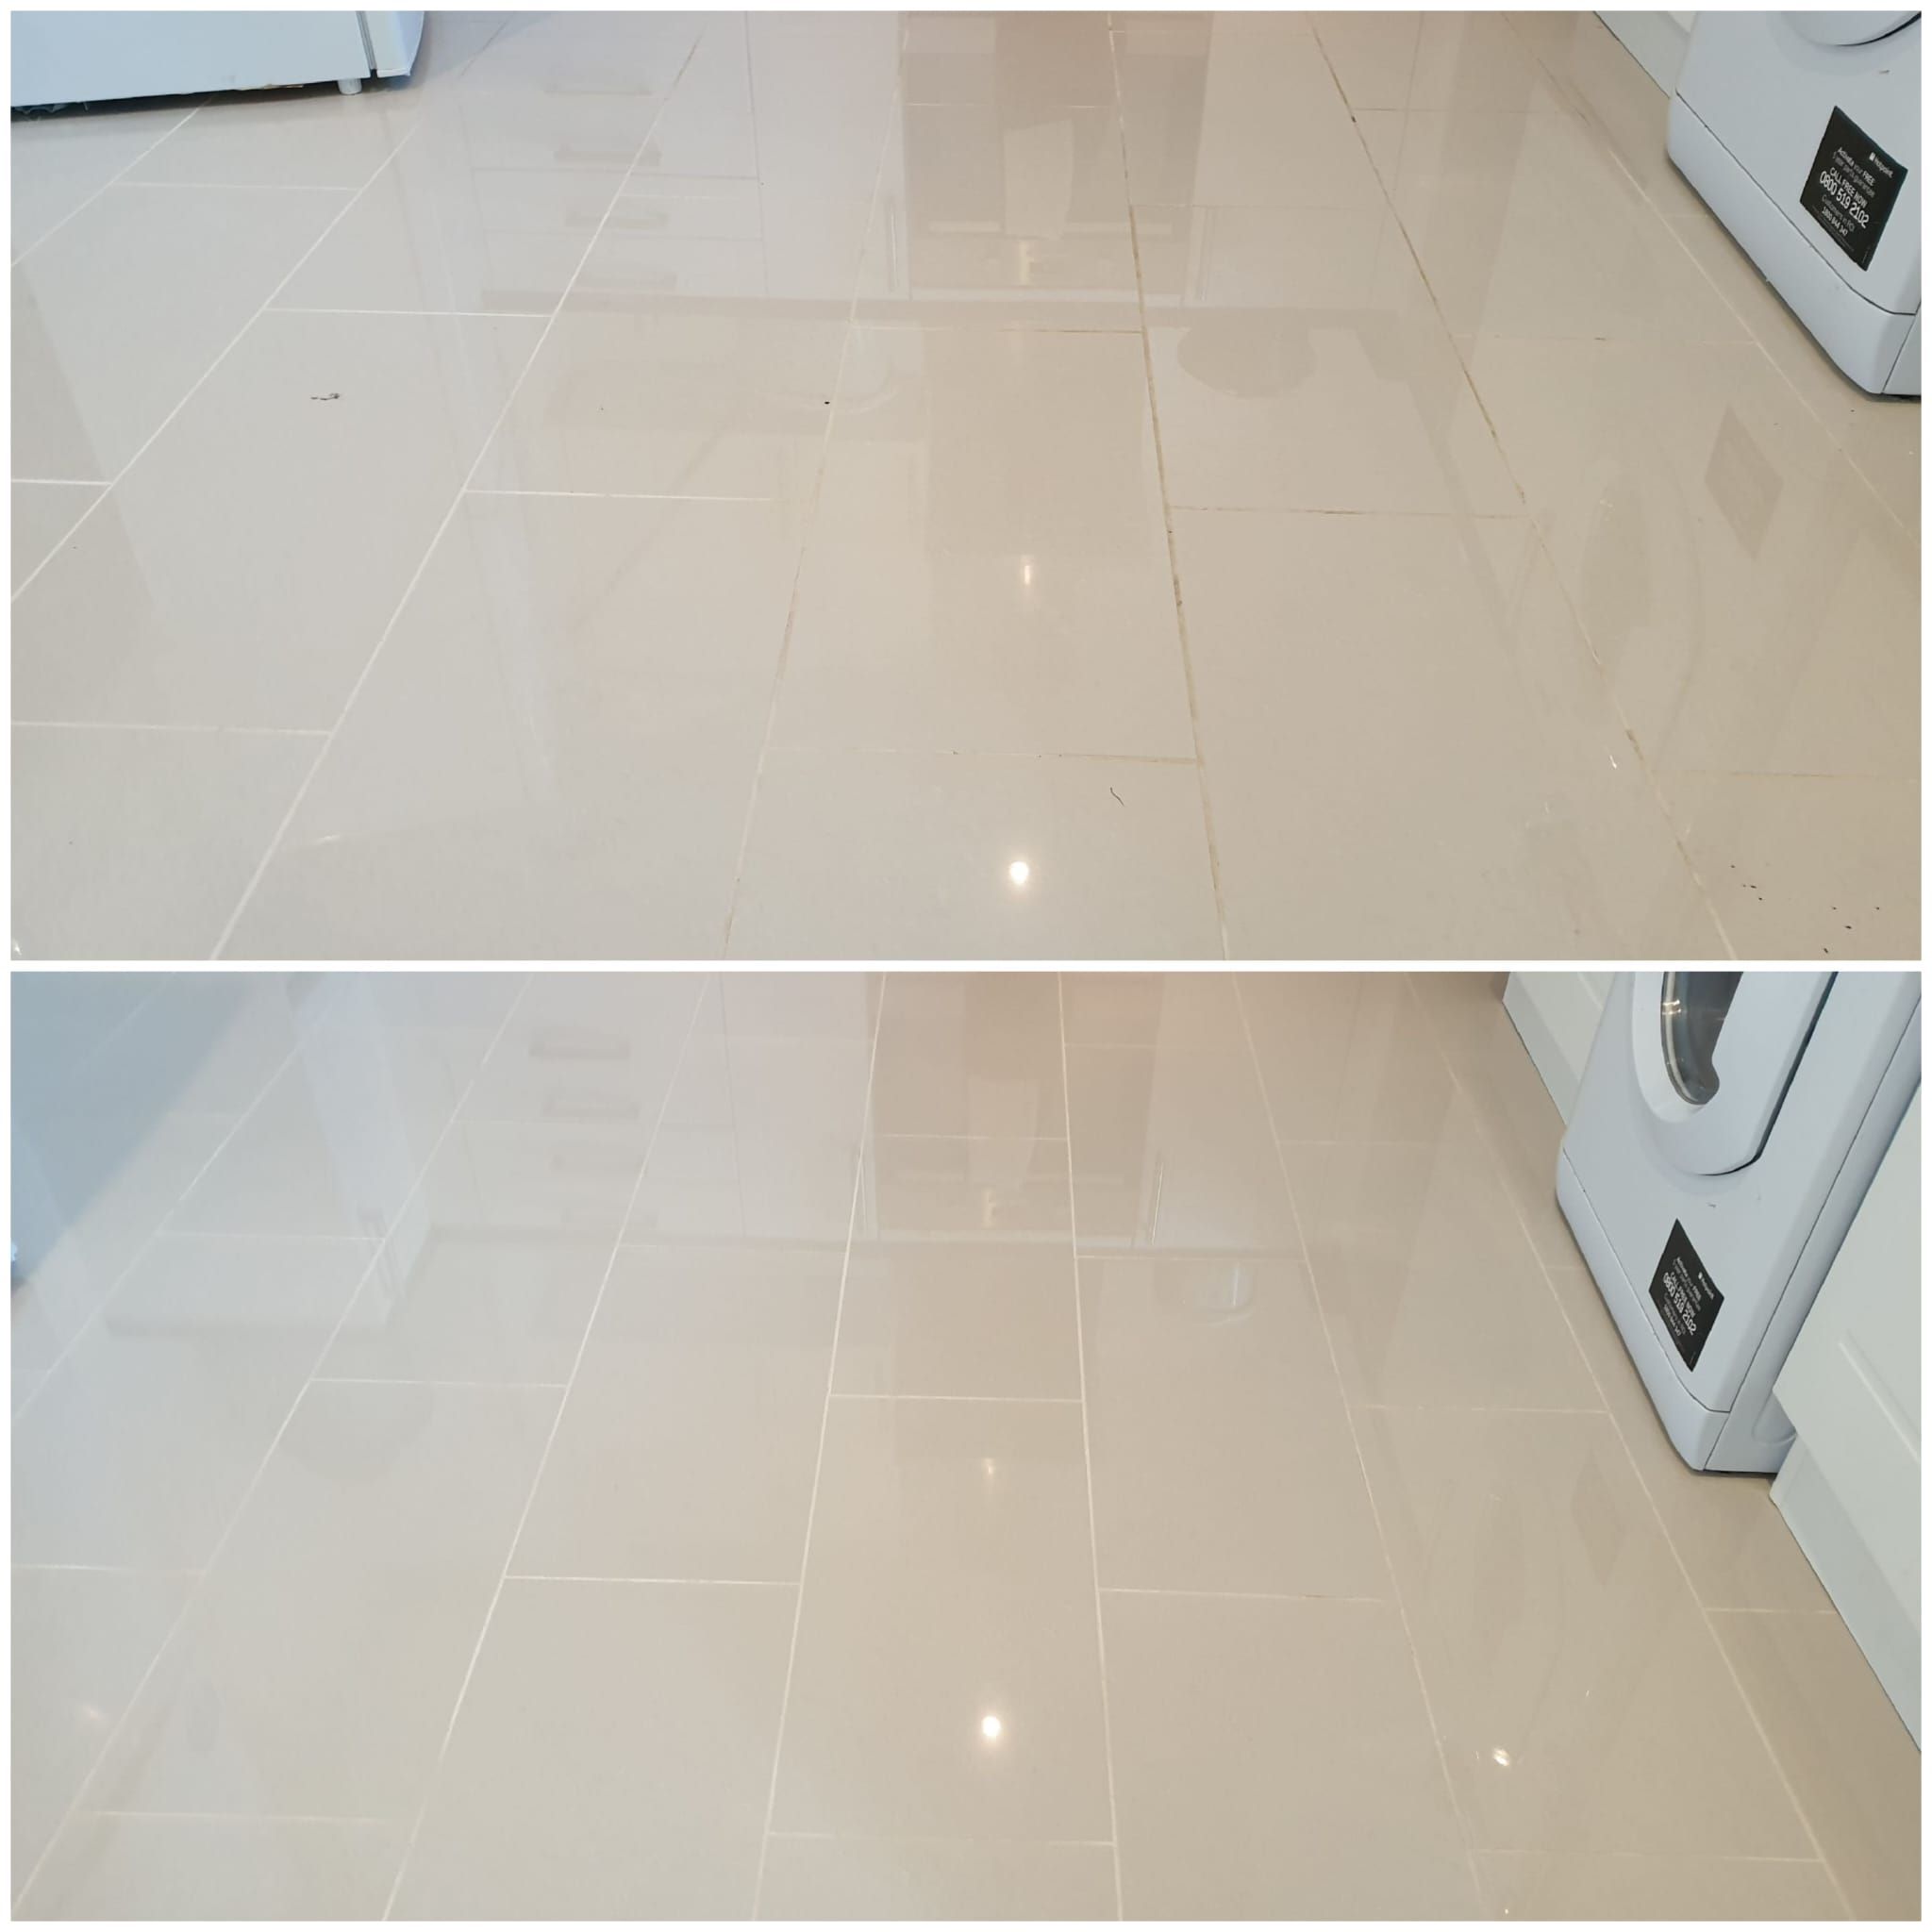 Cleaned kitchen floor before and after